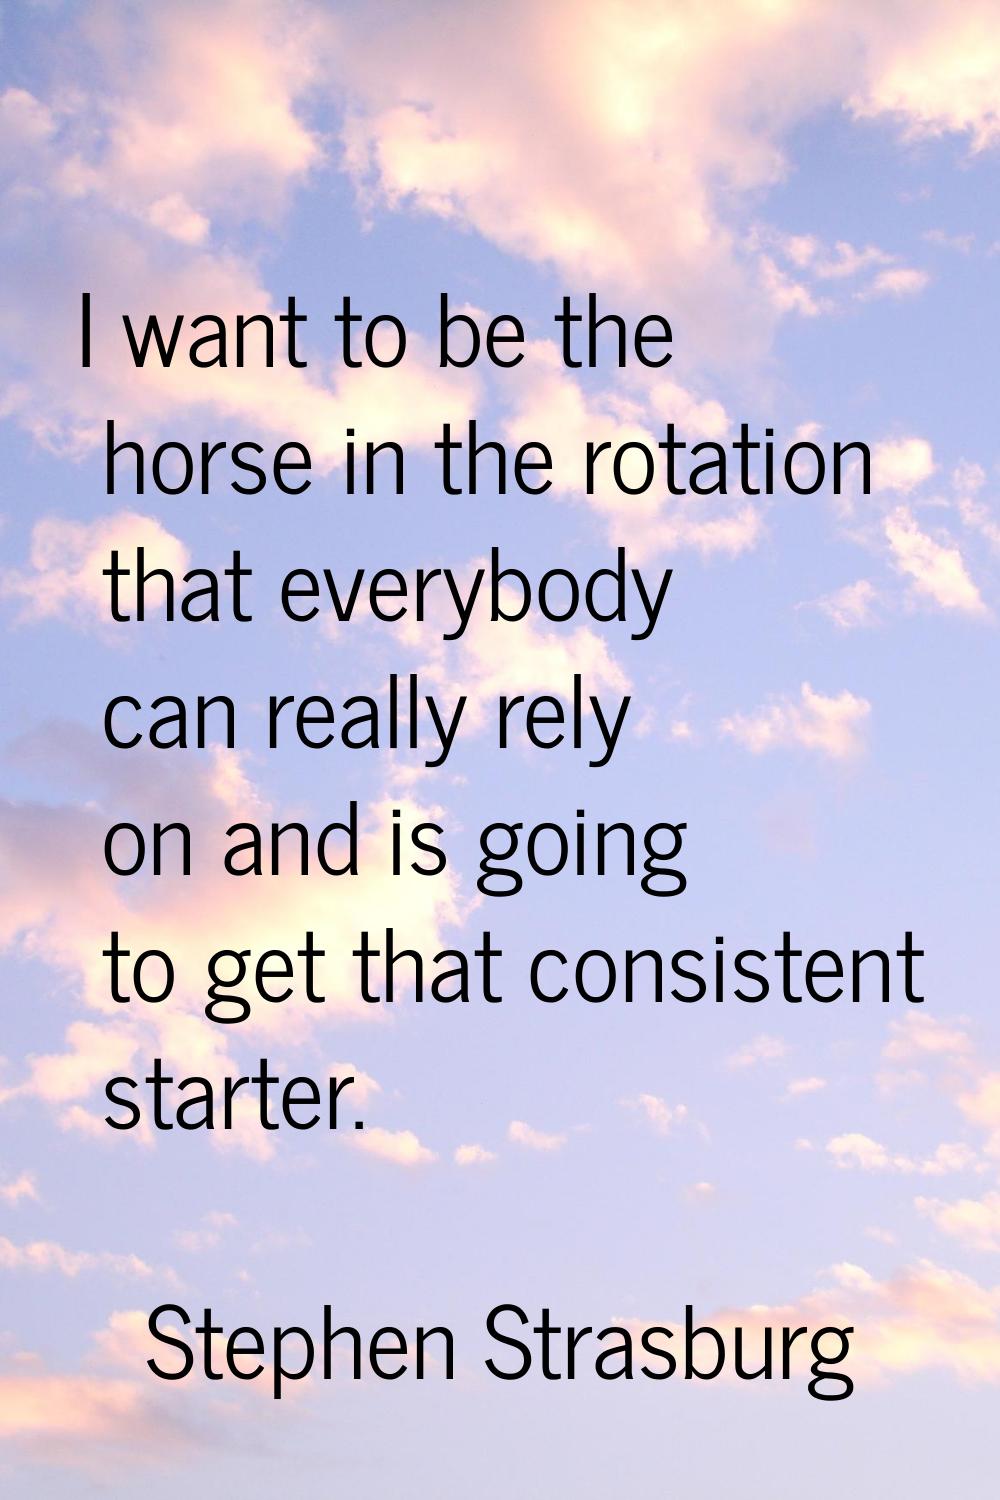 I want to be the horse in the rotation that everybody can really rely on and is going to get that c